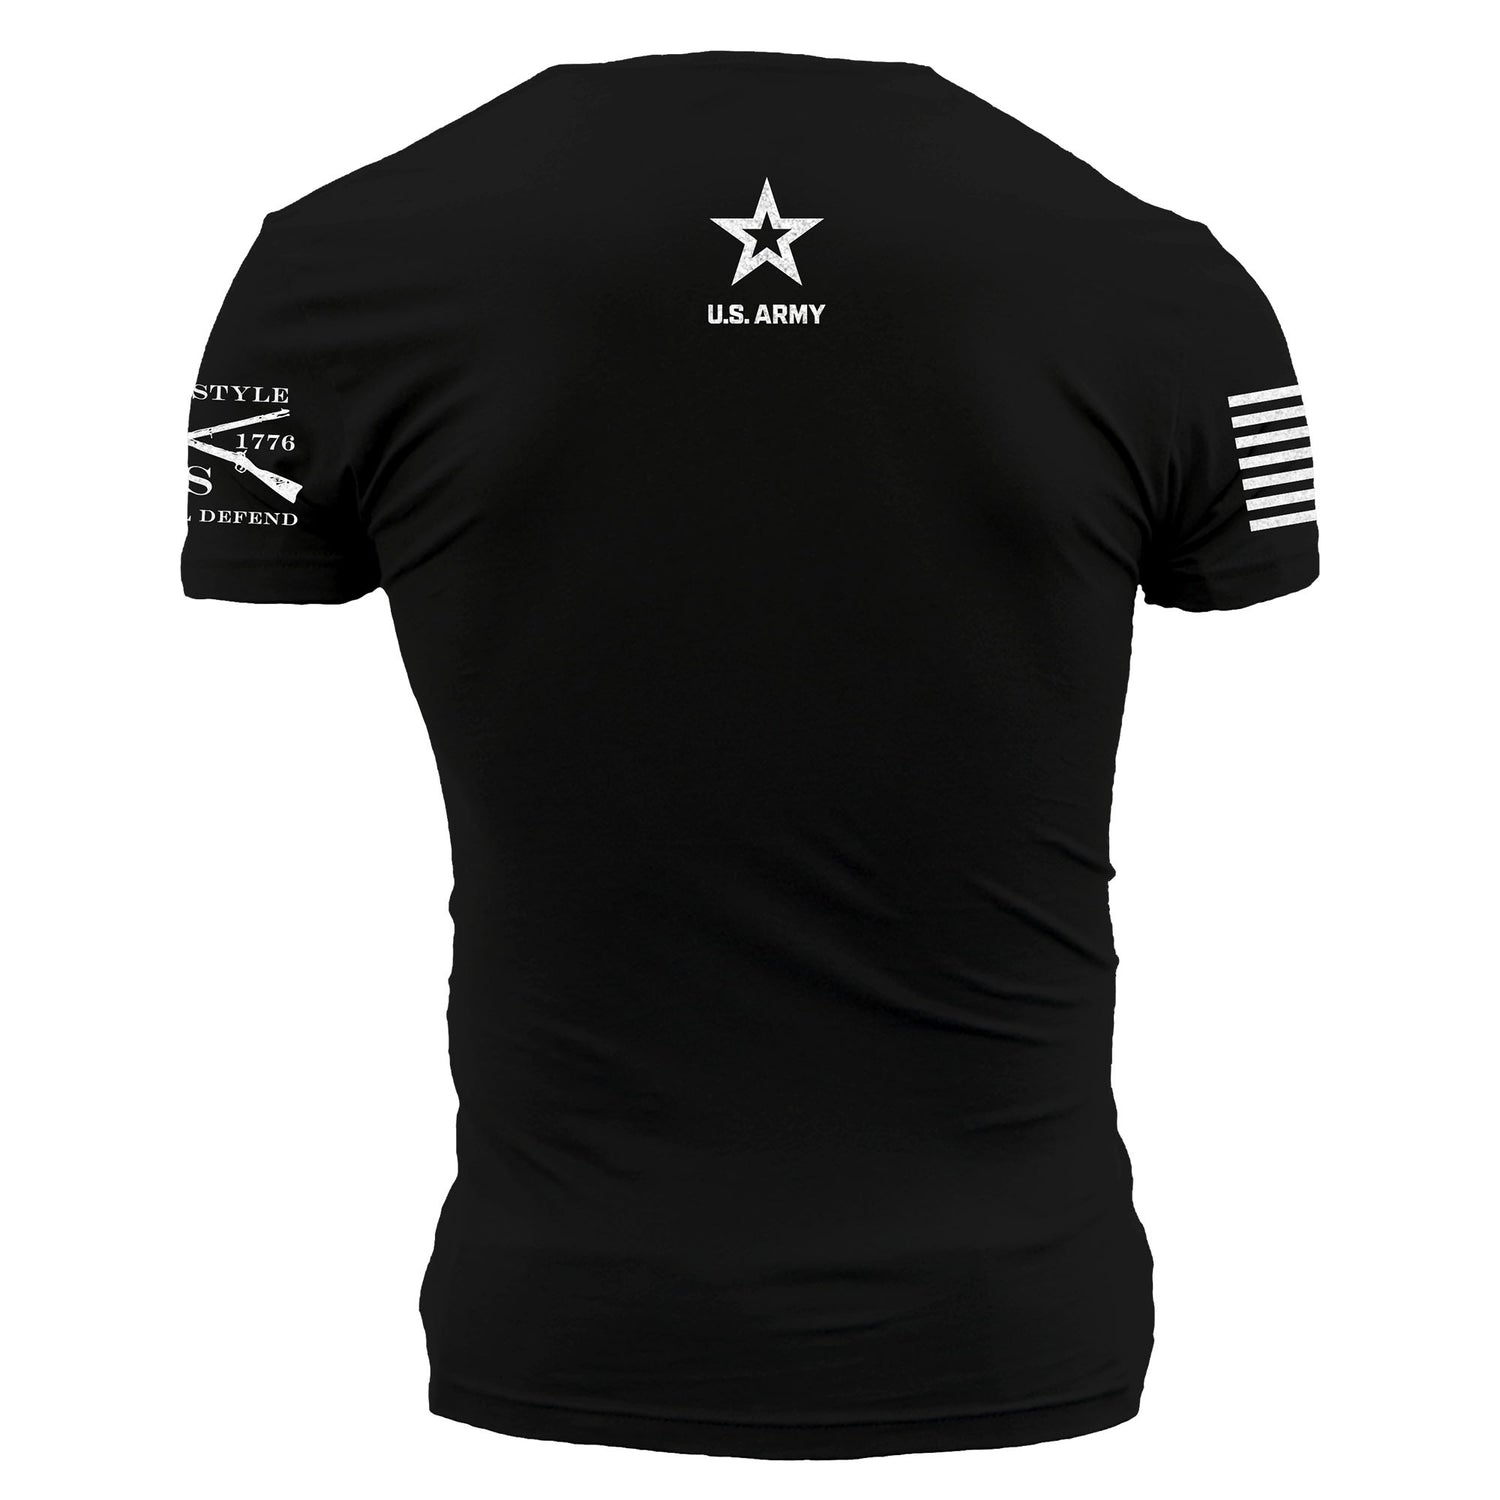 Active Military - Army Shirt